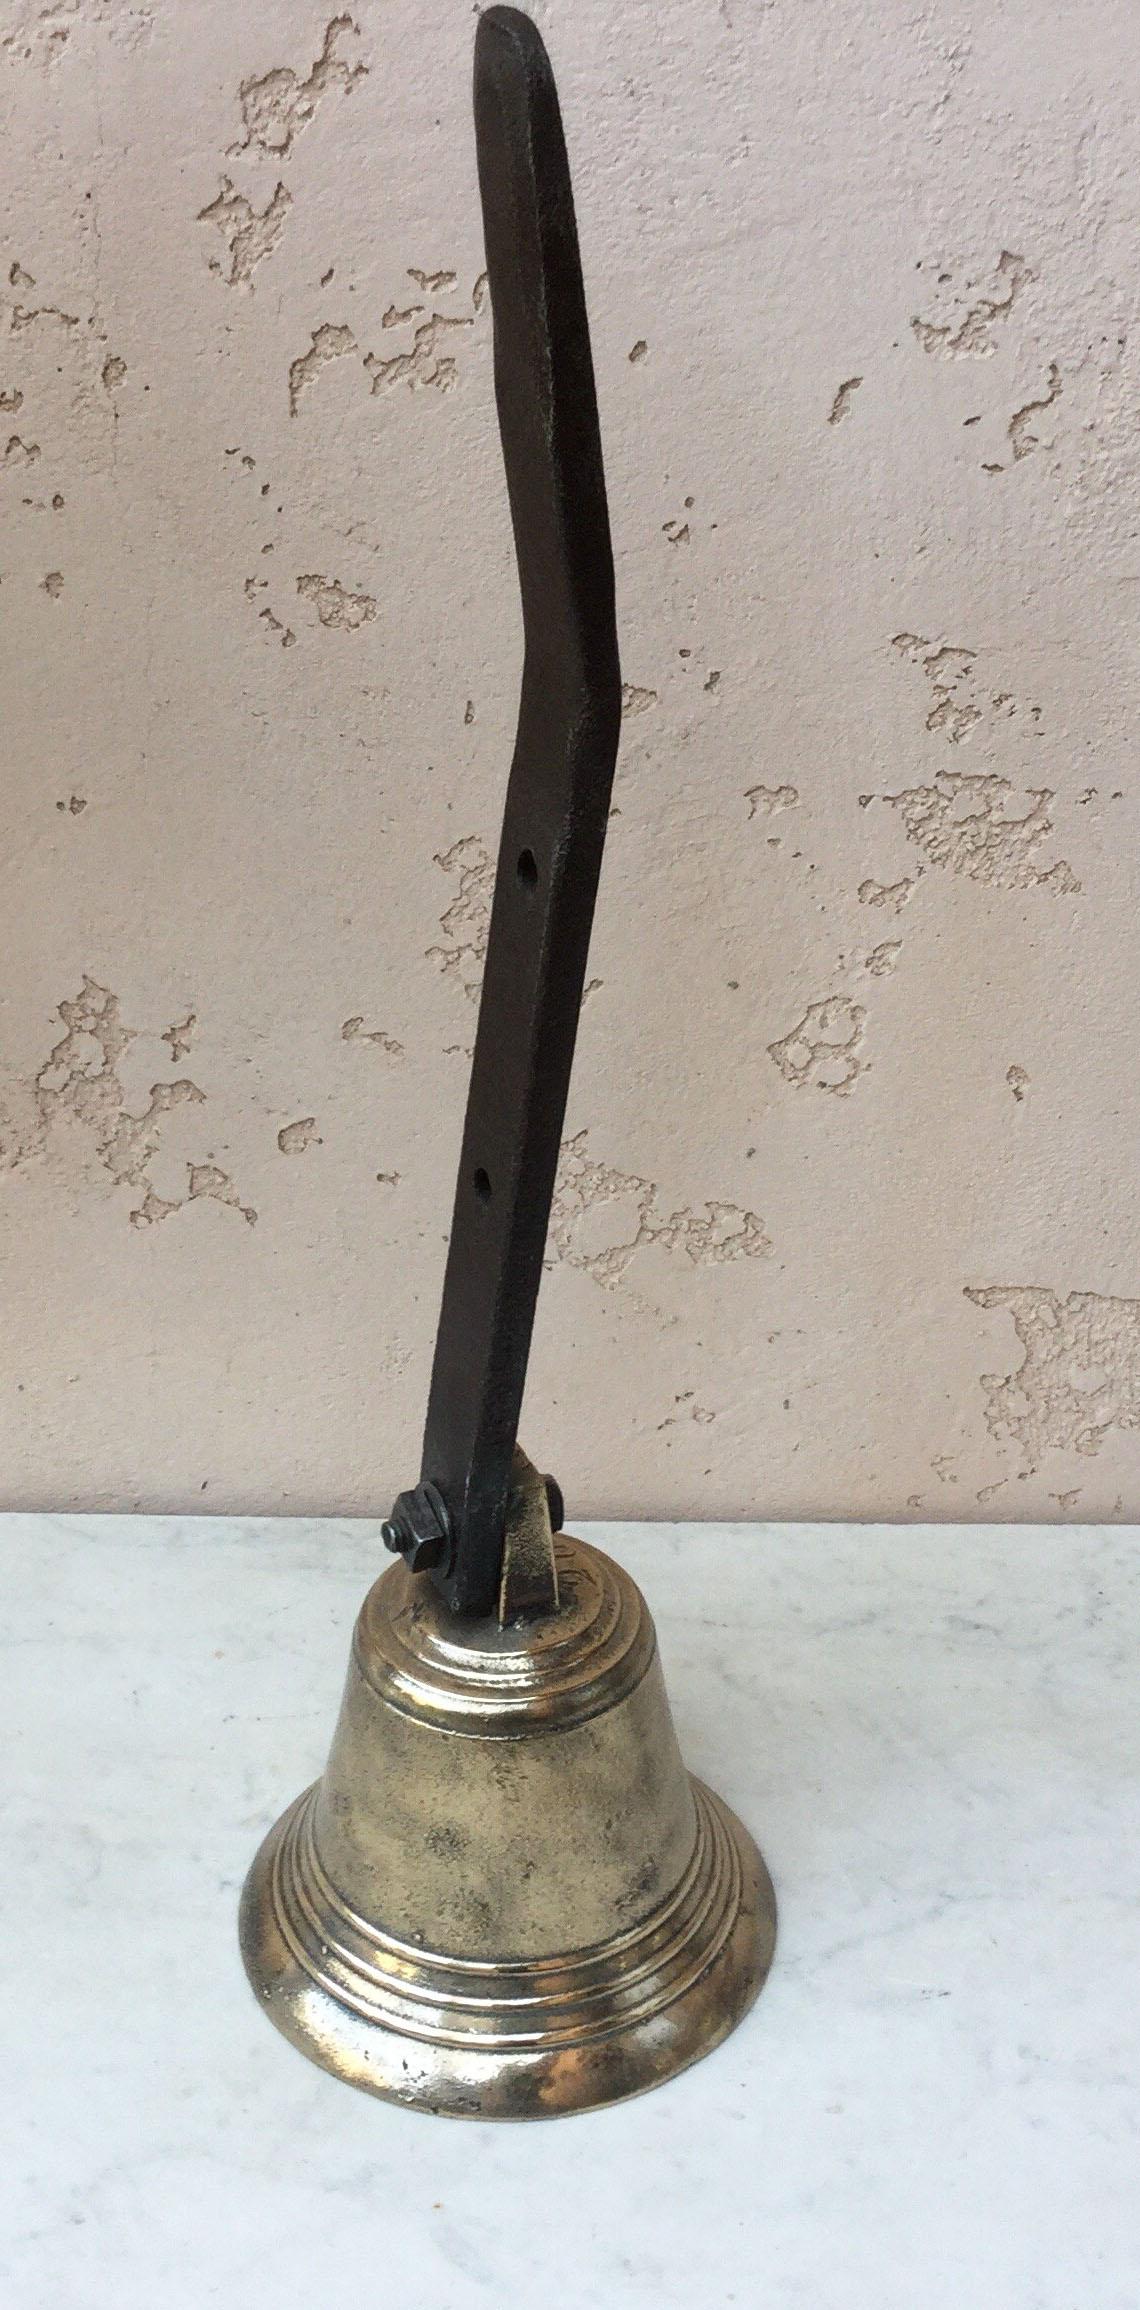 19th century French heavy bronze farm bell with iron with number 20, high quality, polished.